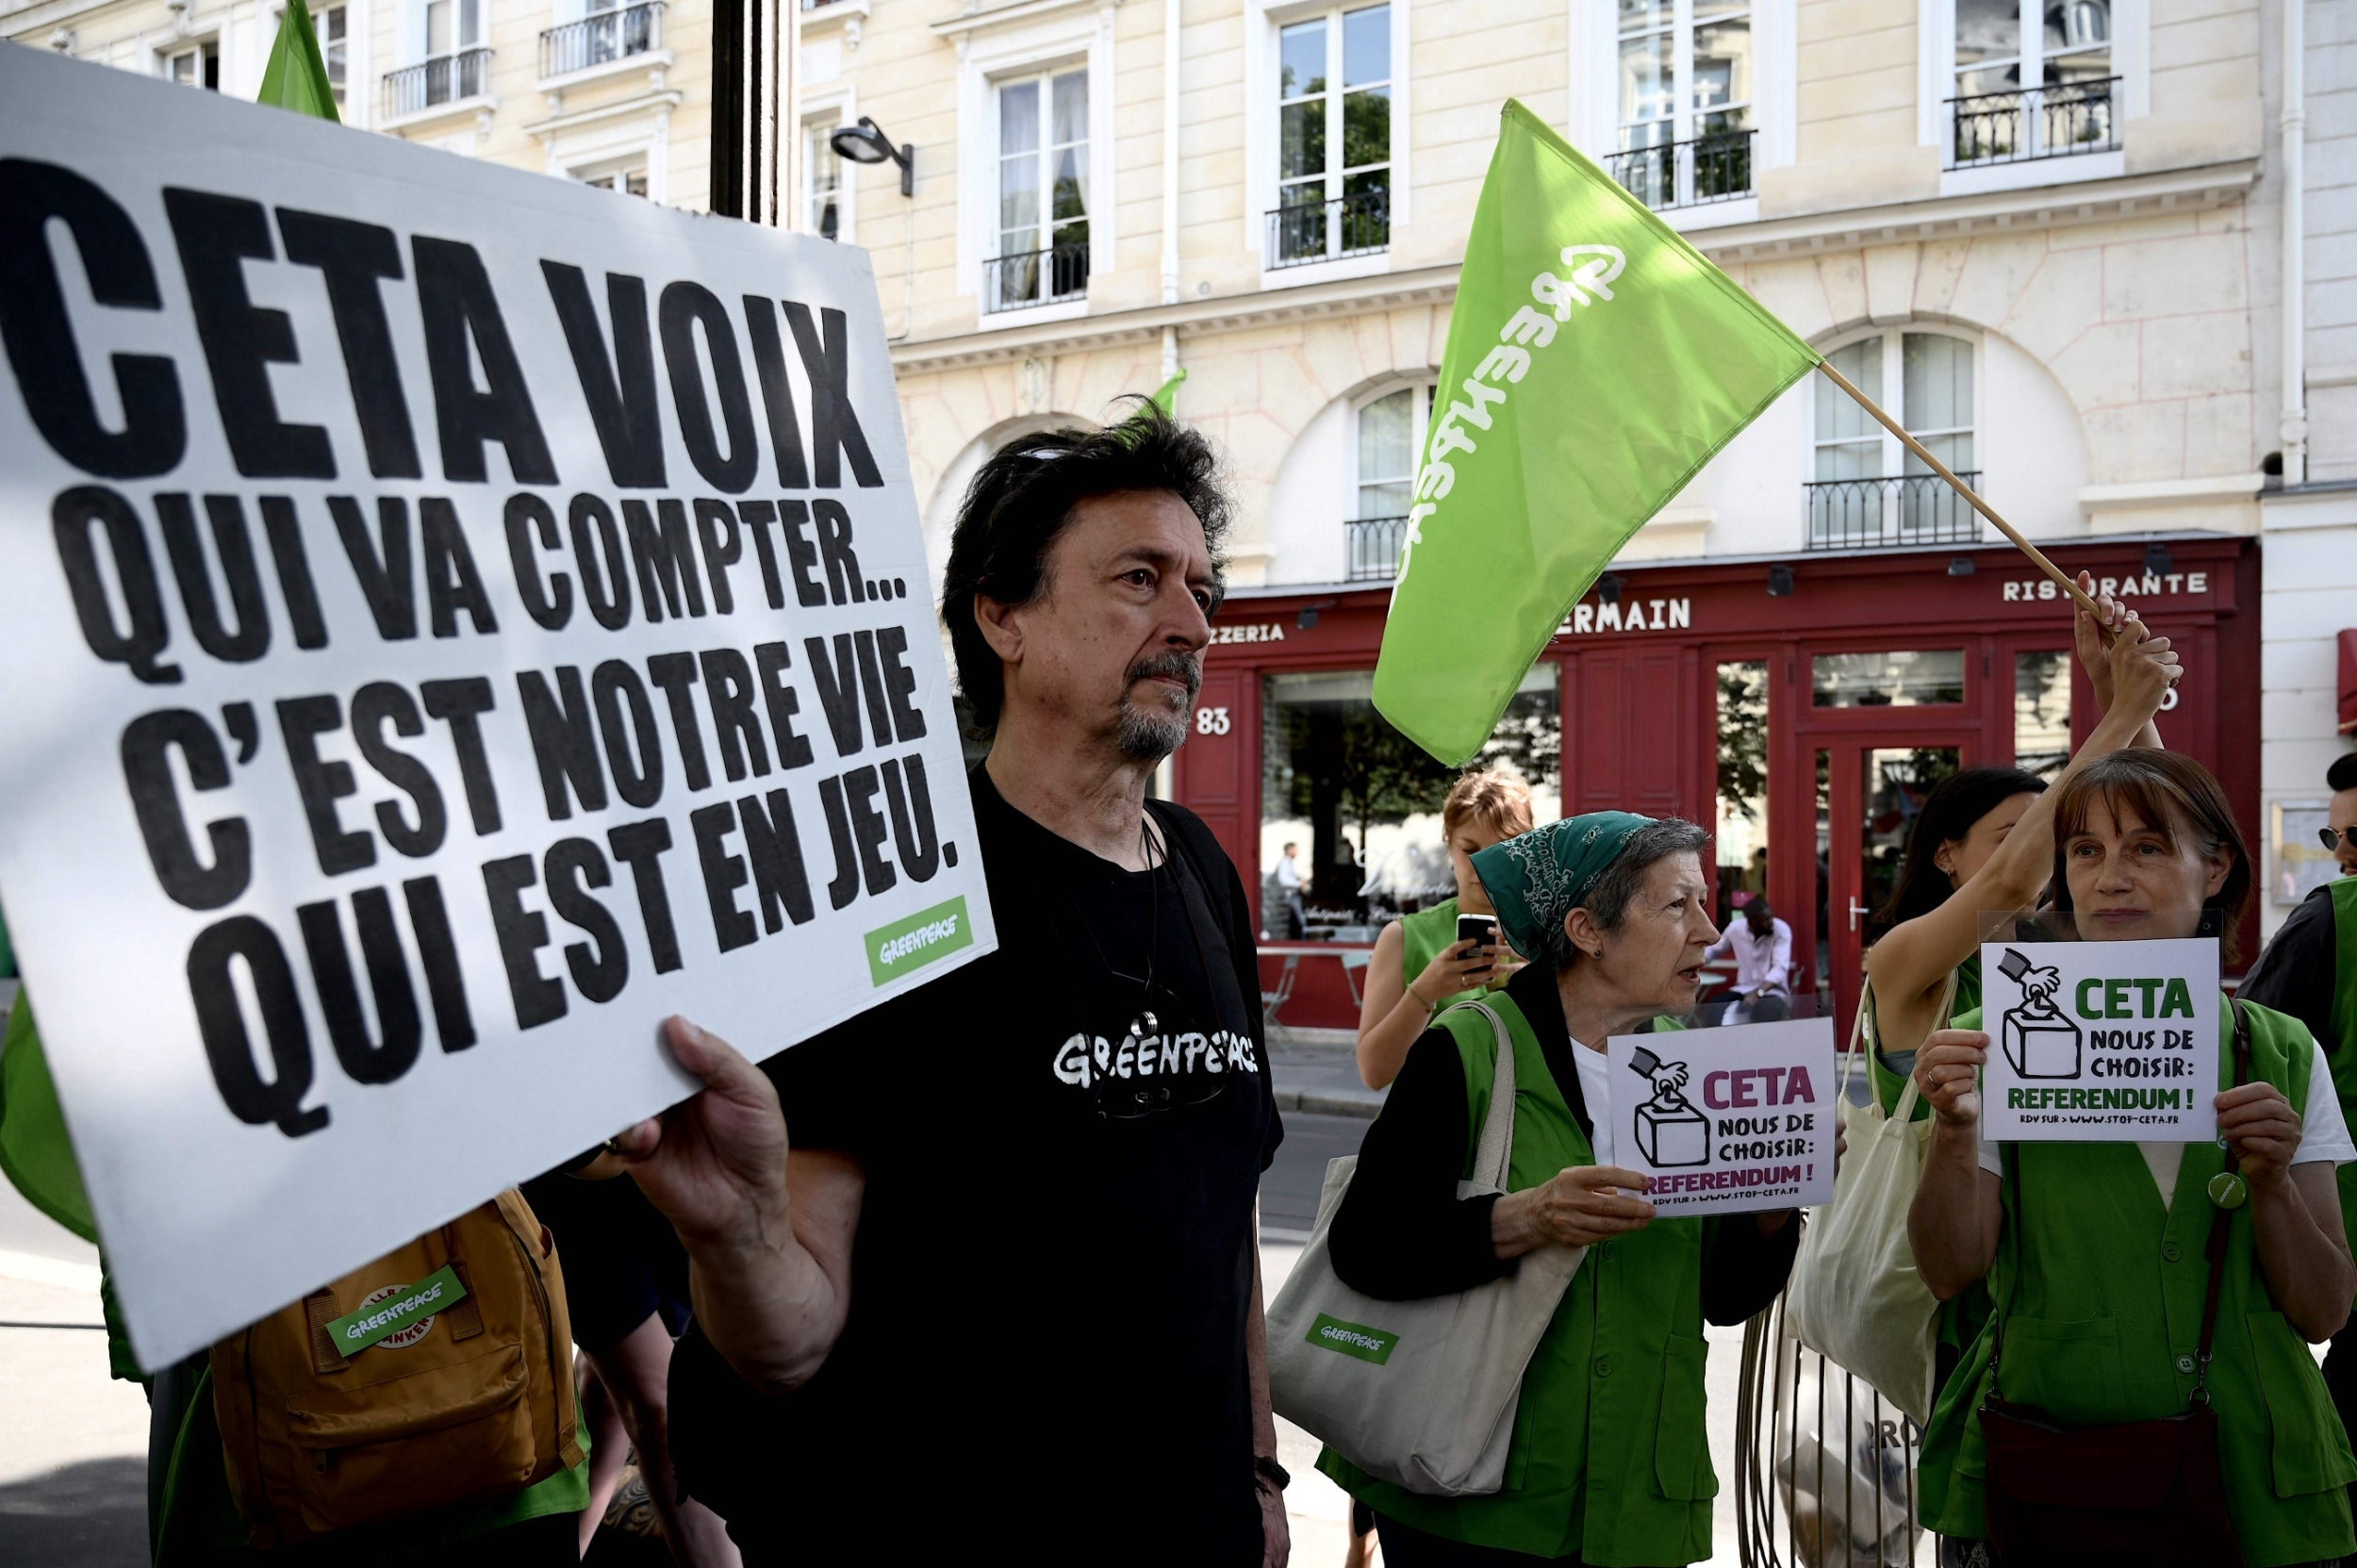 Protests against Ceta were staged in Paris on Tuesday